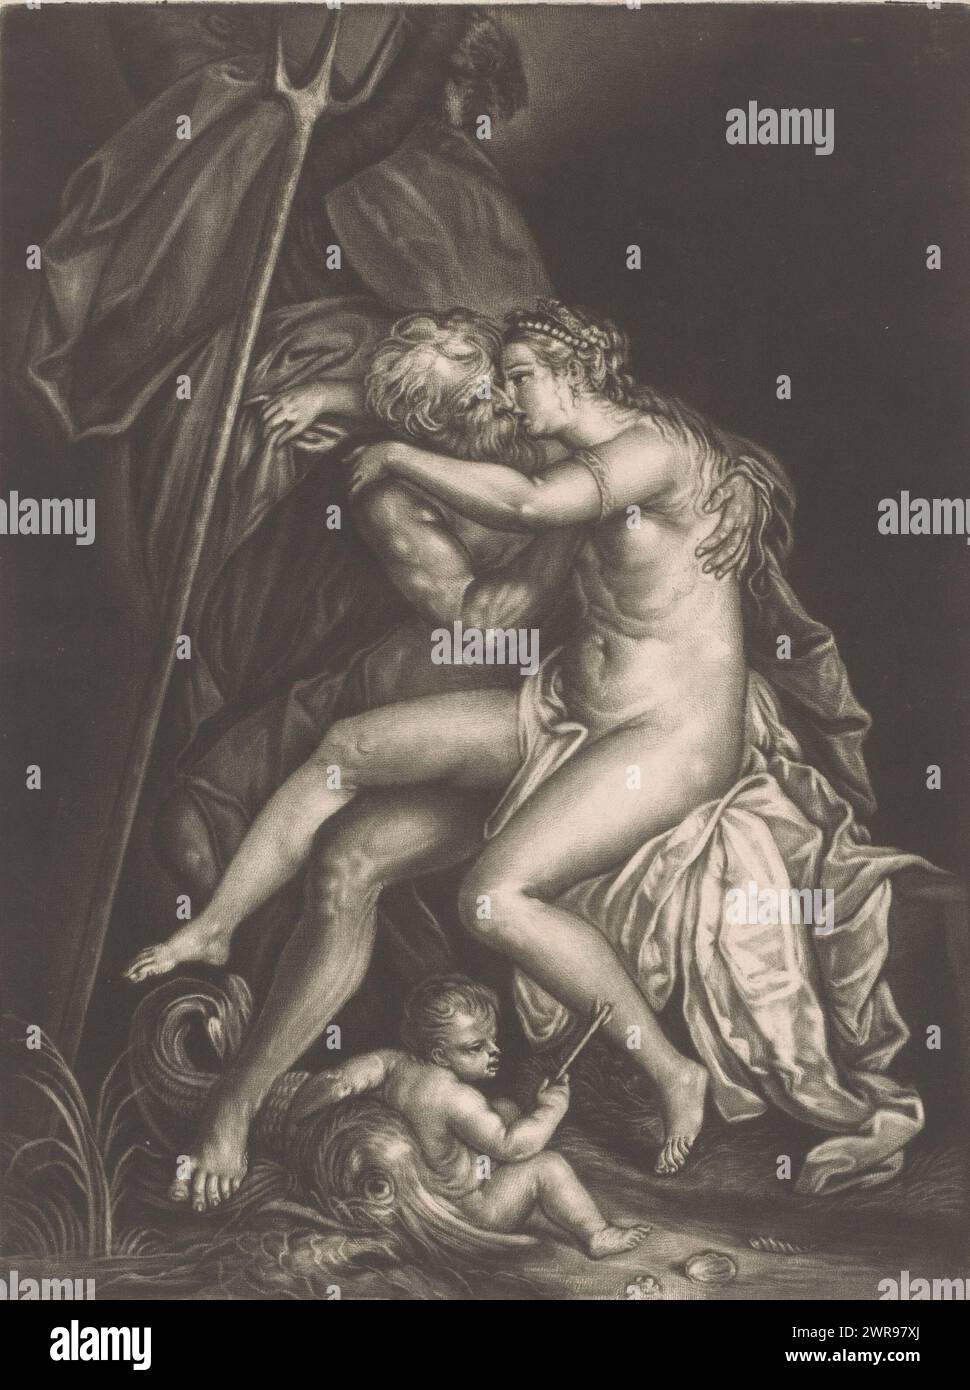 Neptune and Amphitrite kissing, print maker: John Smith (prentmaker/ uitgever), (attributed to), after print by: Giovanni Jacopo Caraglio, (possibly), after painting by: Perino del Vaga, (possibly), 1662 - 1742, paper, height 254 mm × width 180 mm, print Stock Photo